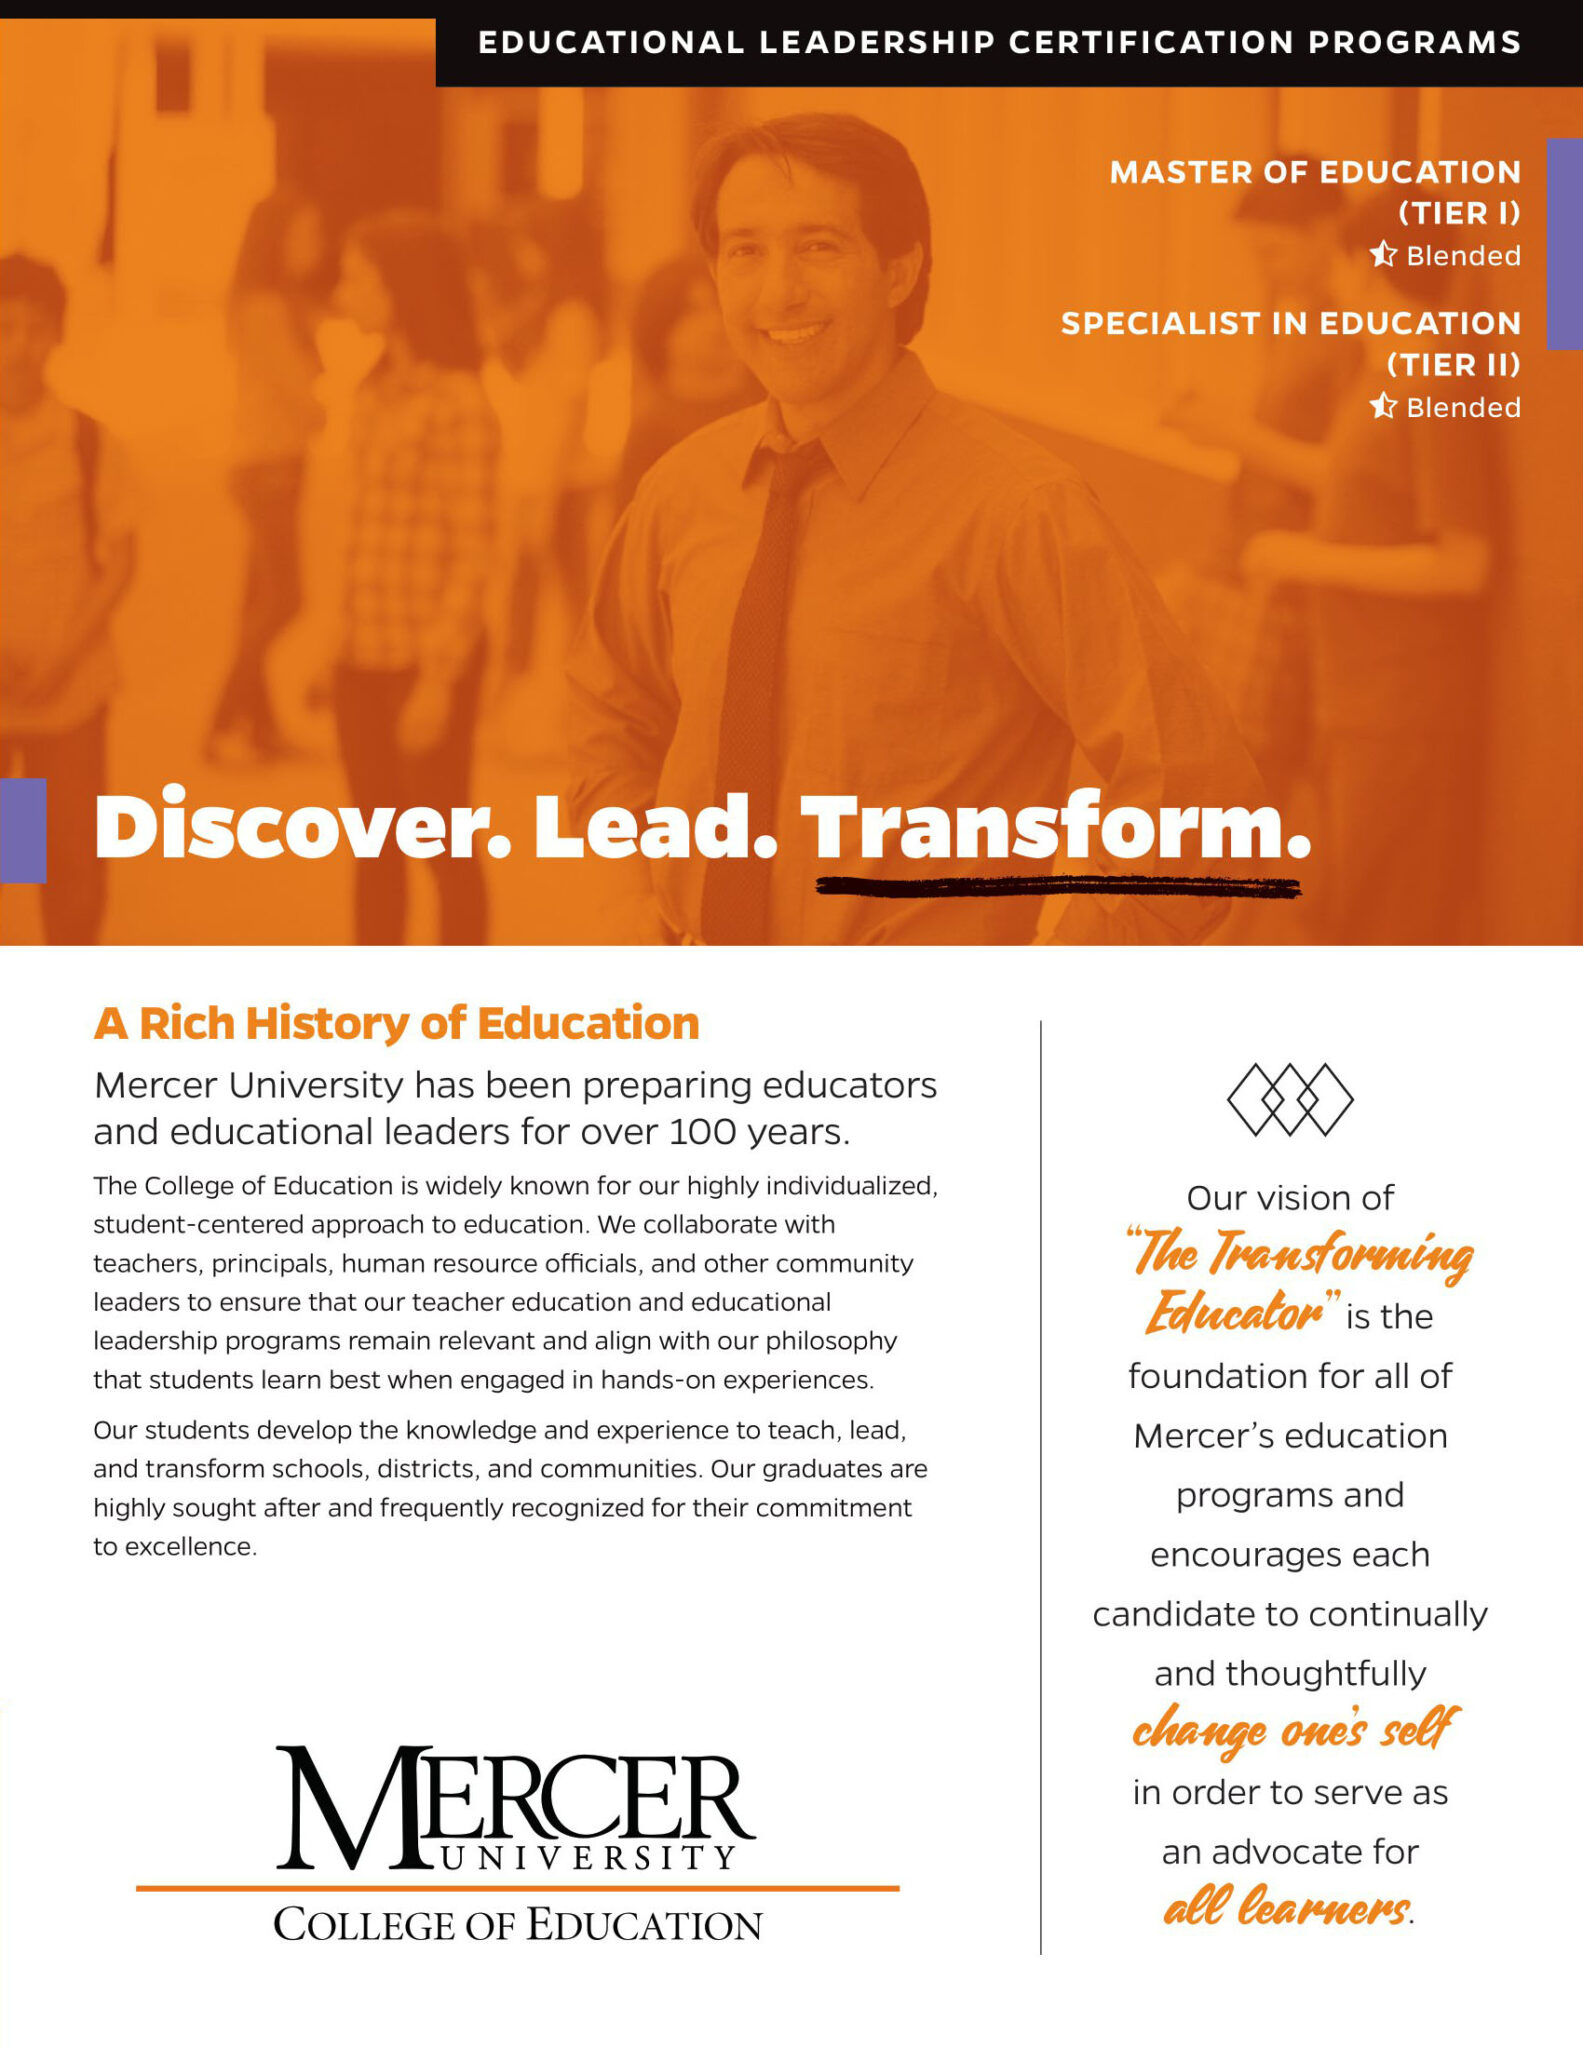 Mercer University Educational Leadership Tier One and Tier Two